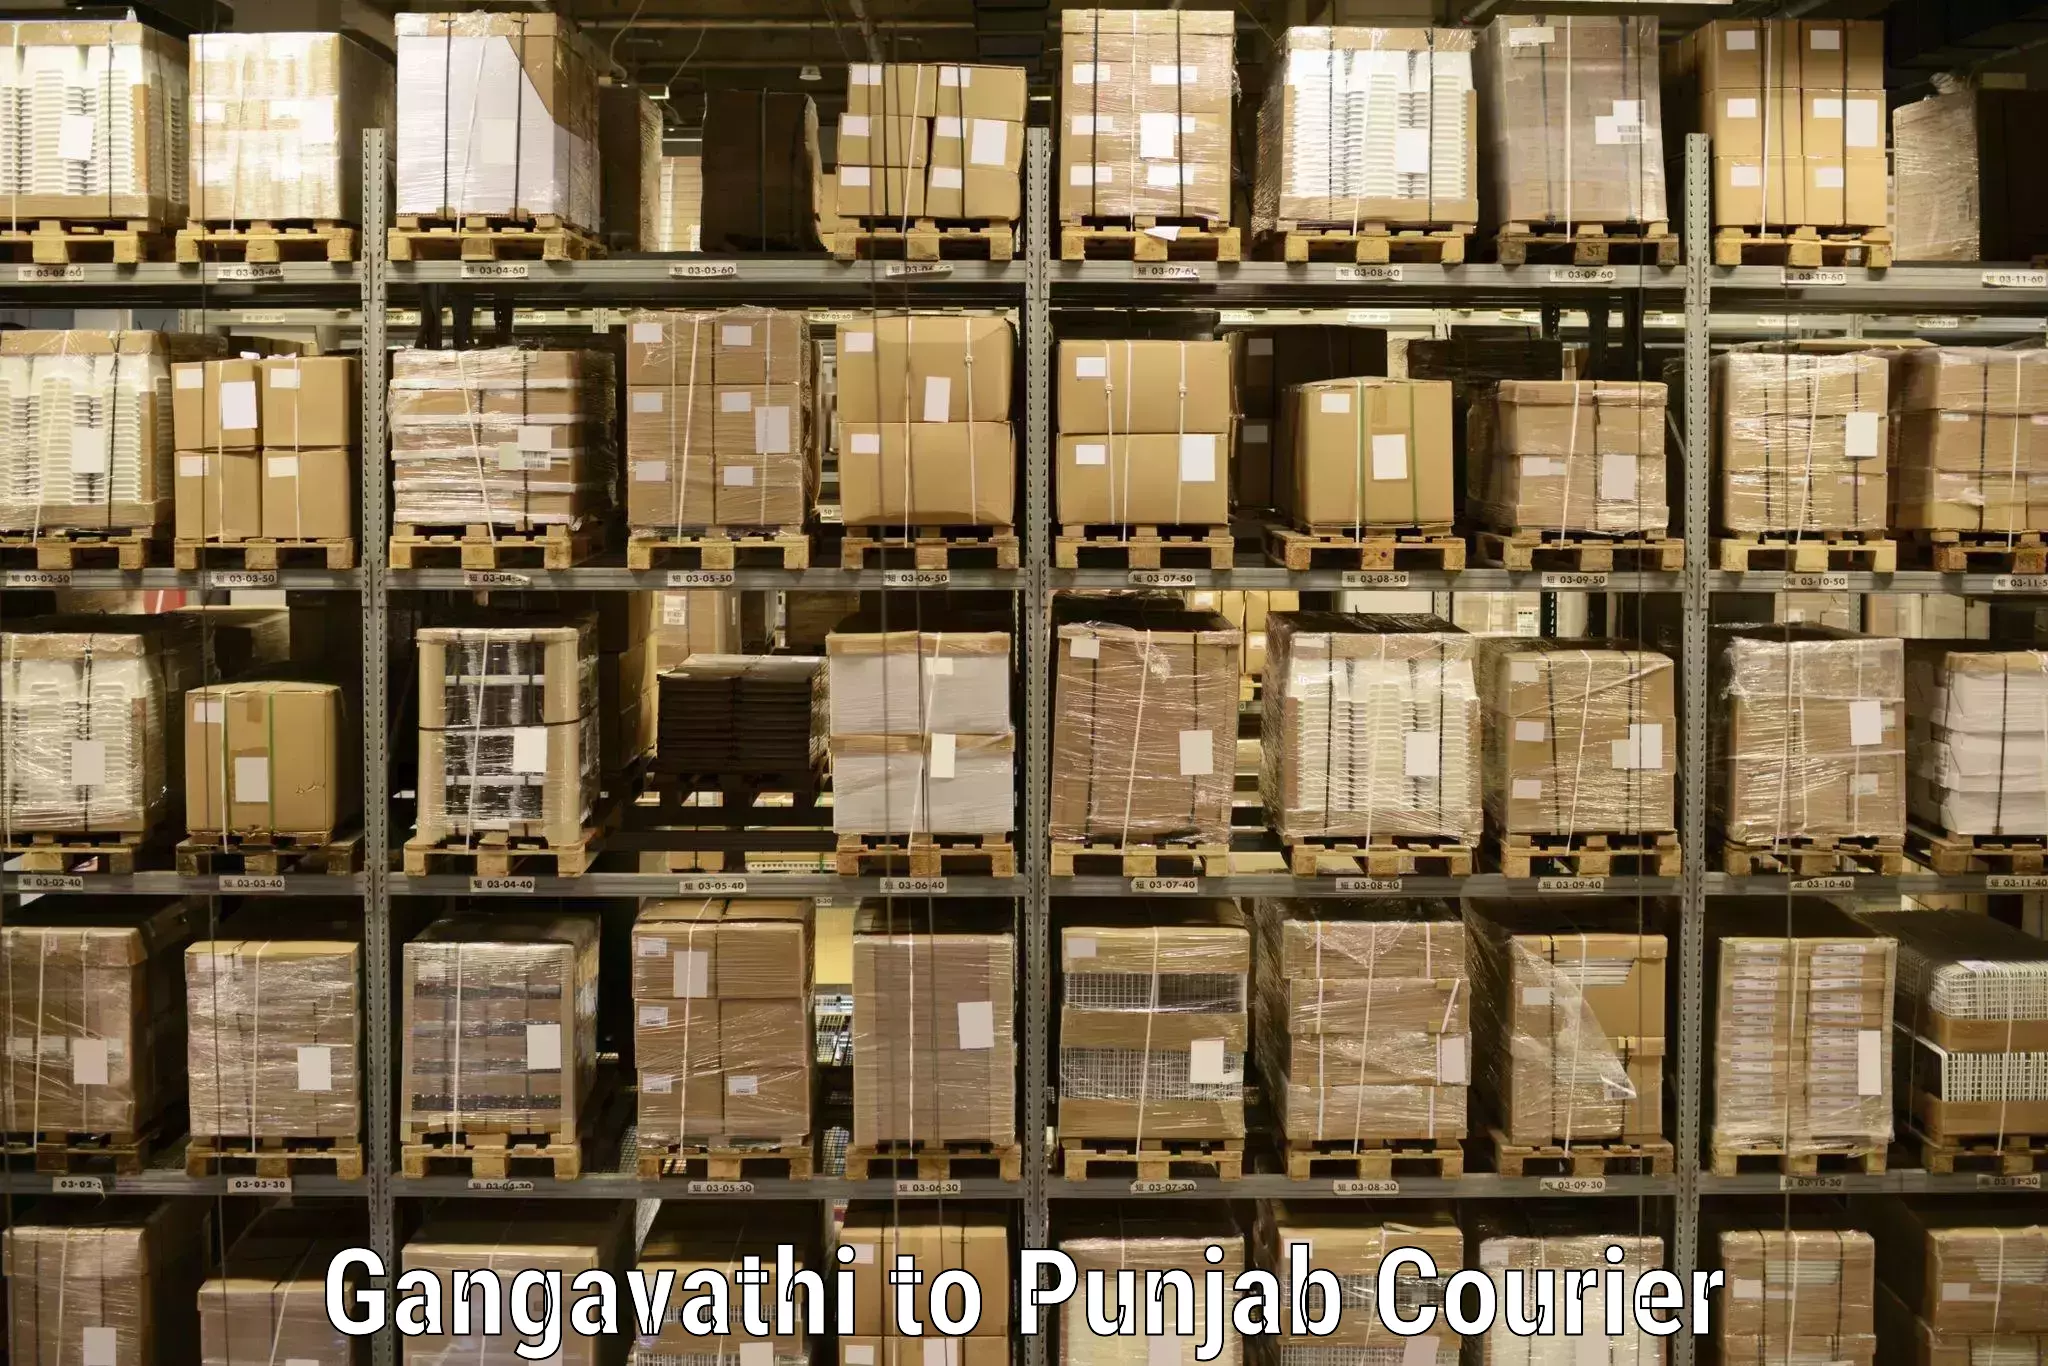 Easy access courier services Gangavathi to Mansa